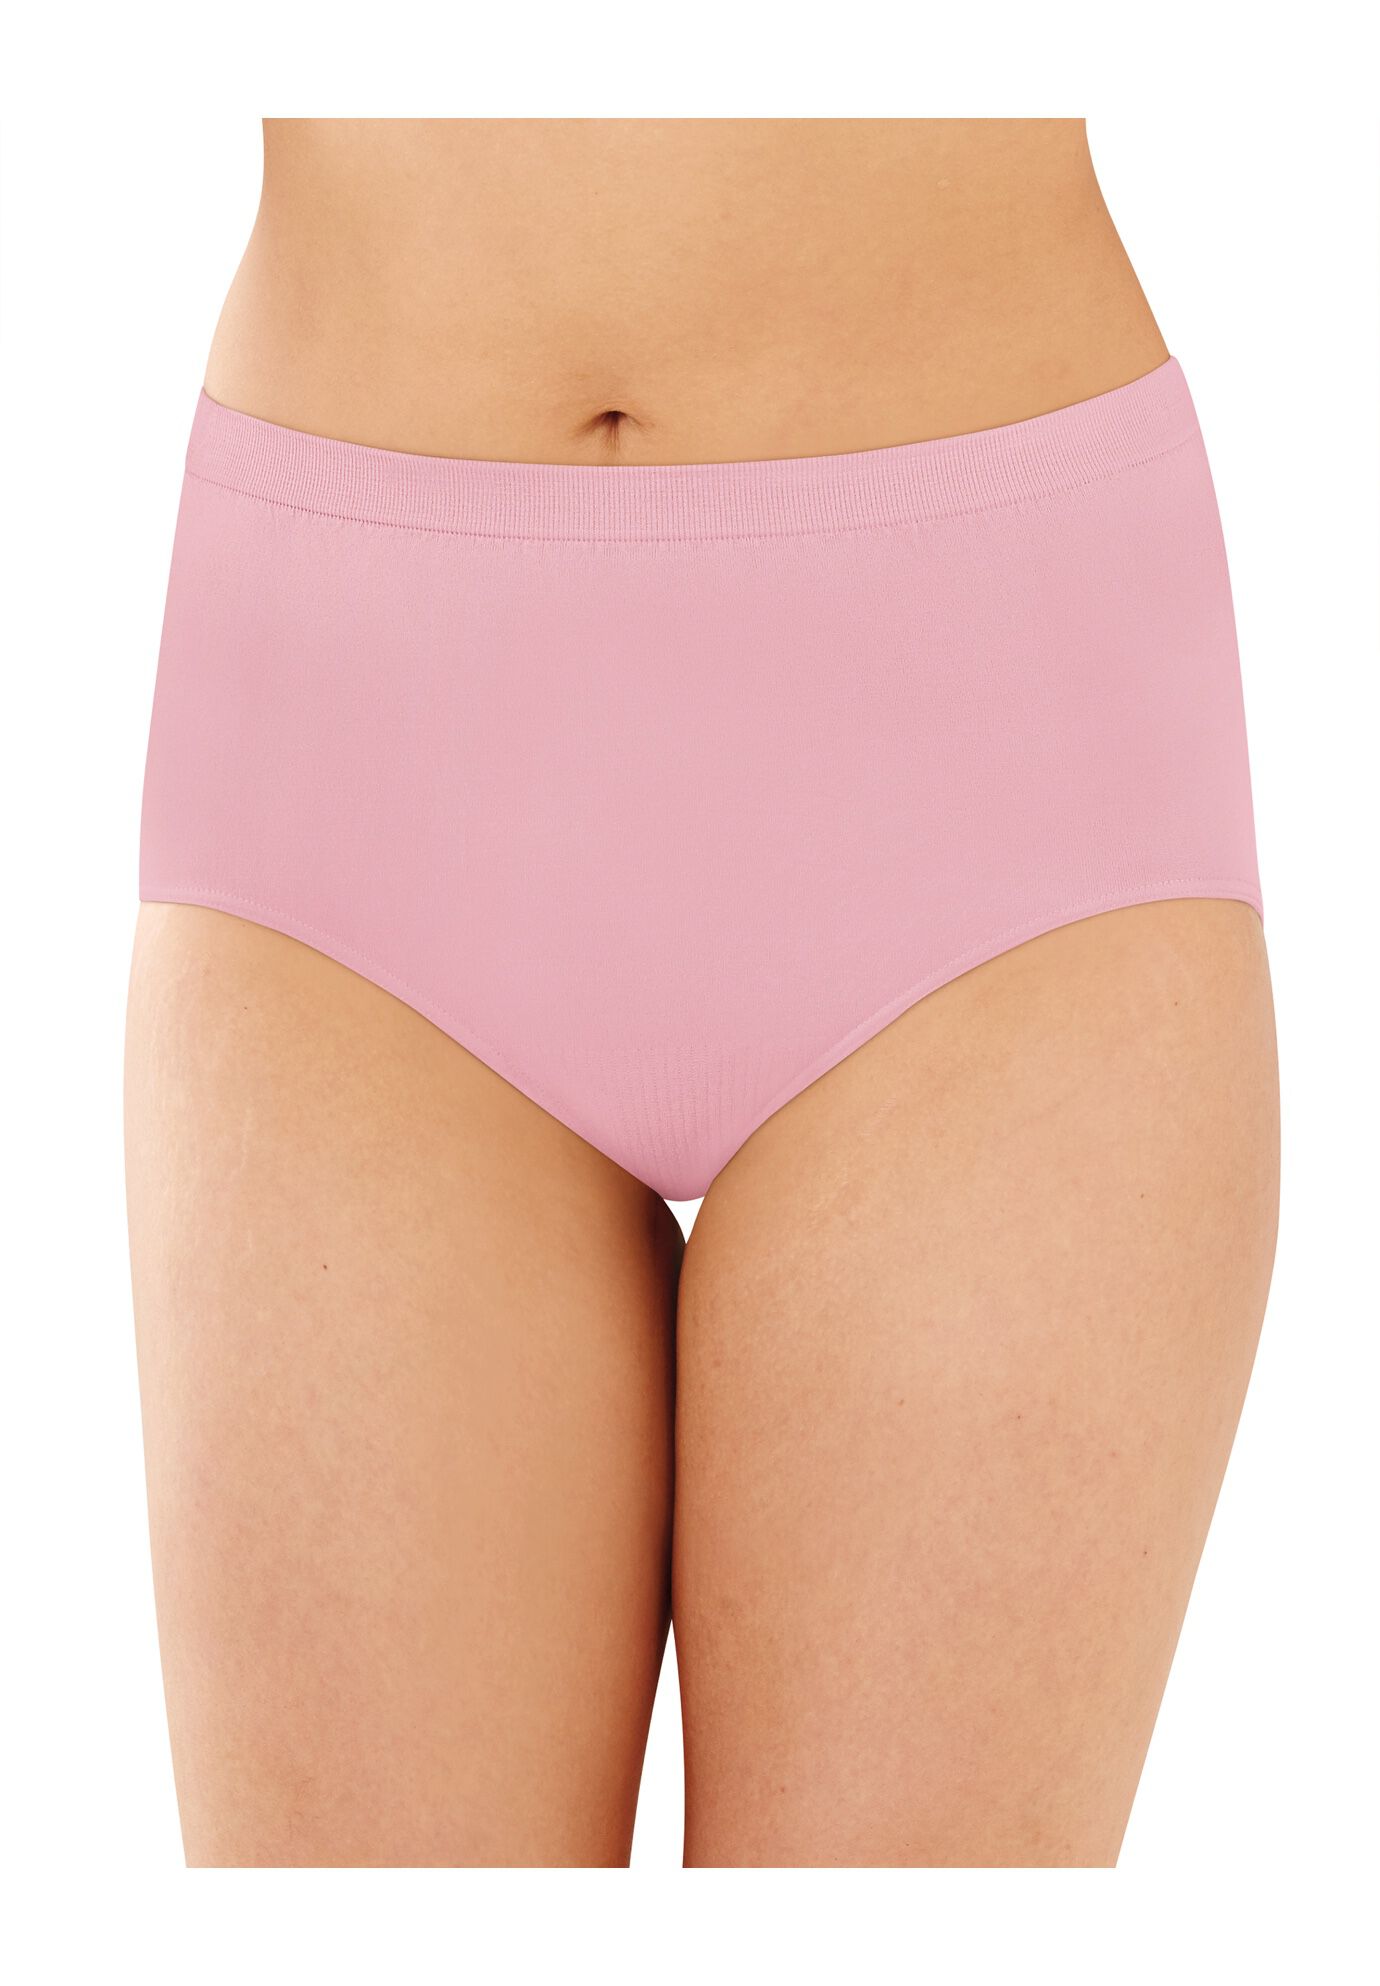 Plus Size Women's Comfort Revolution Brief by Bali in Pink Sands (Size 9)